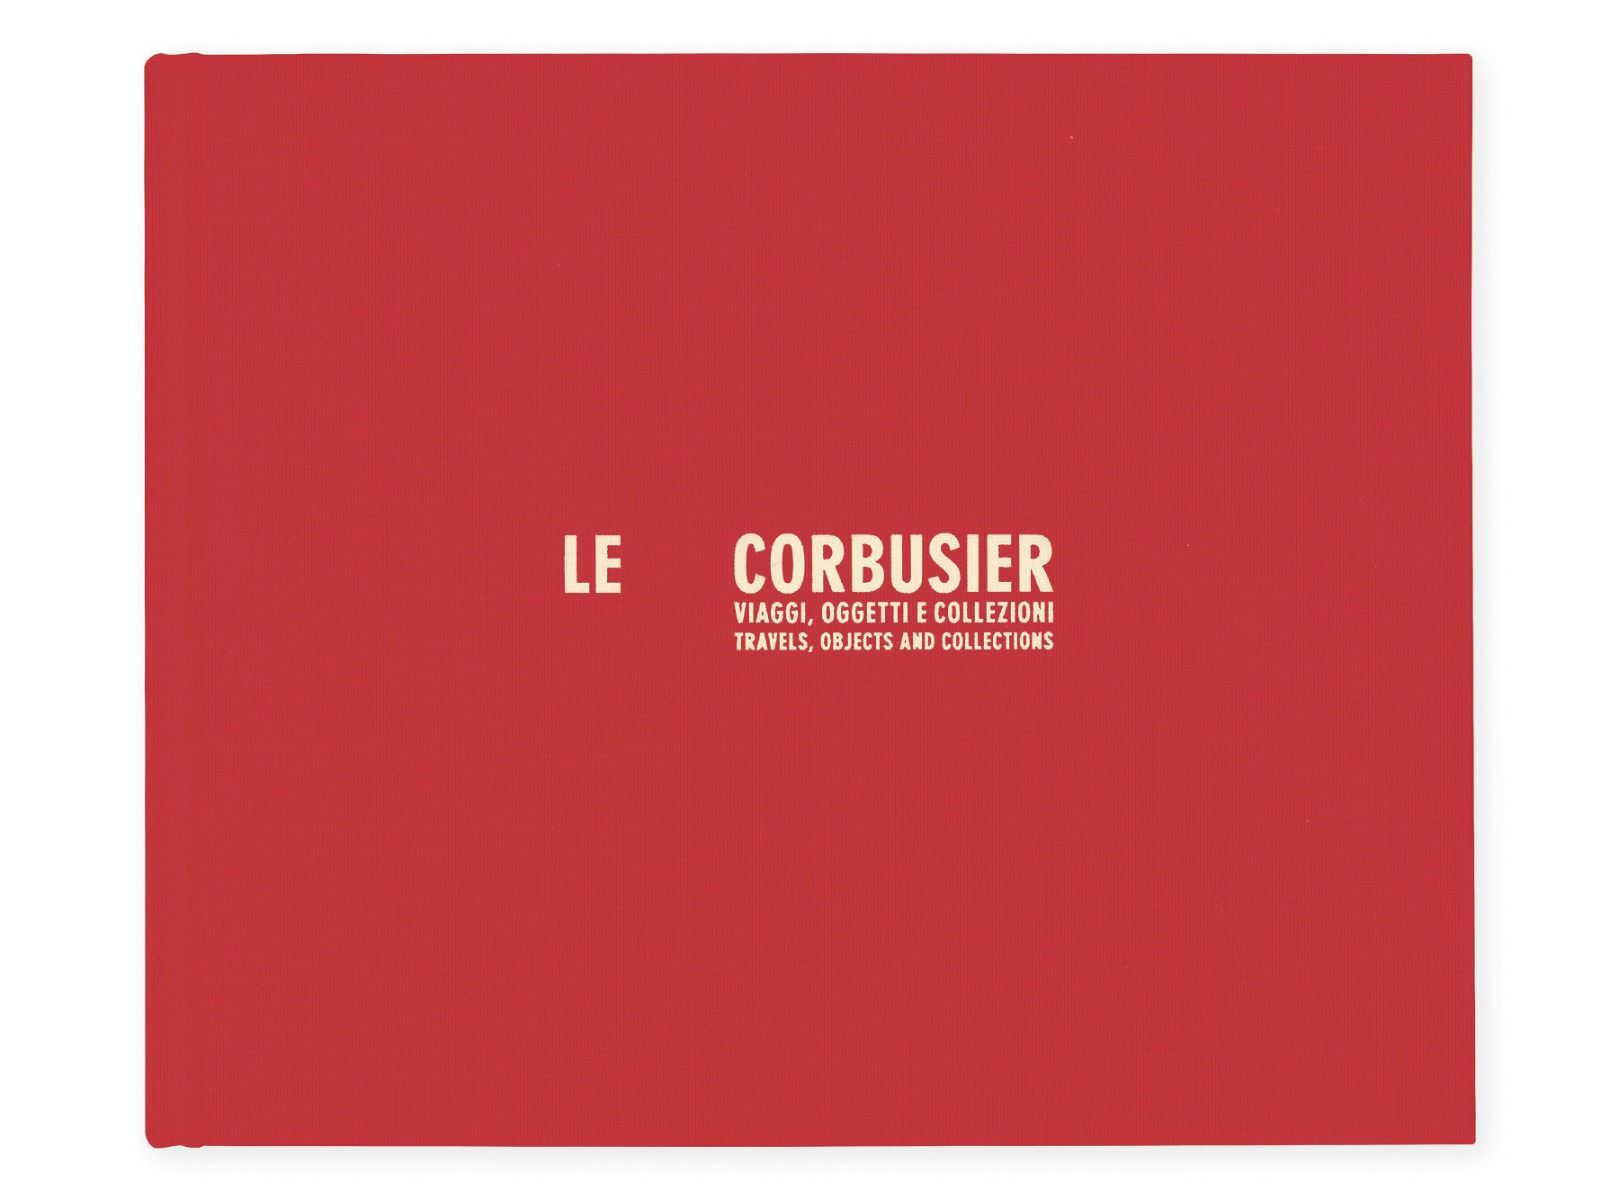  Le Corbusier - Travels, objects and collections